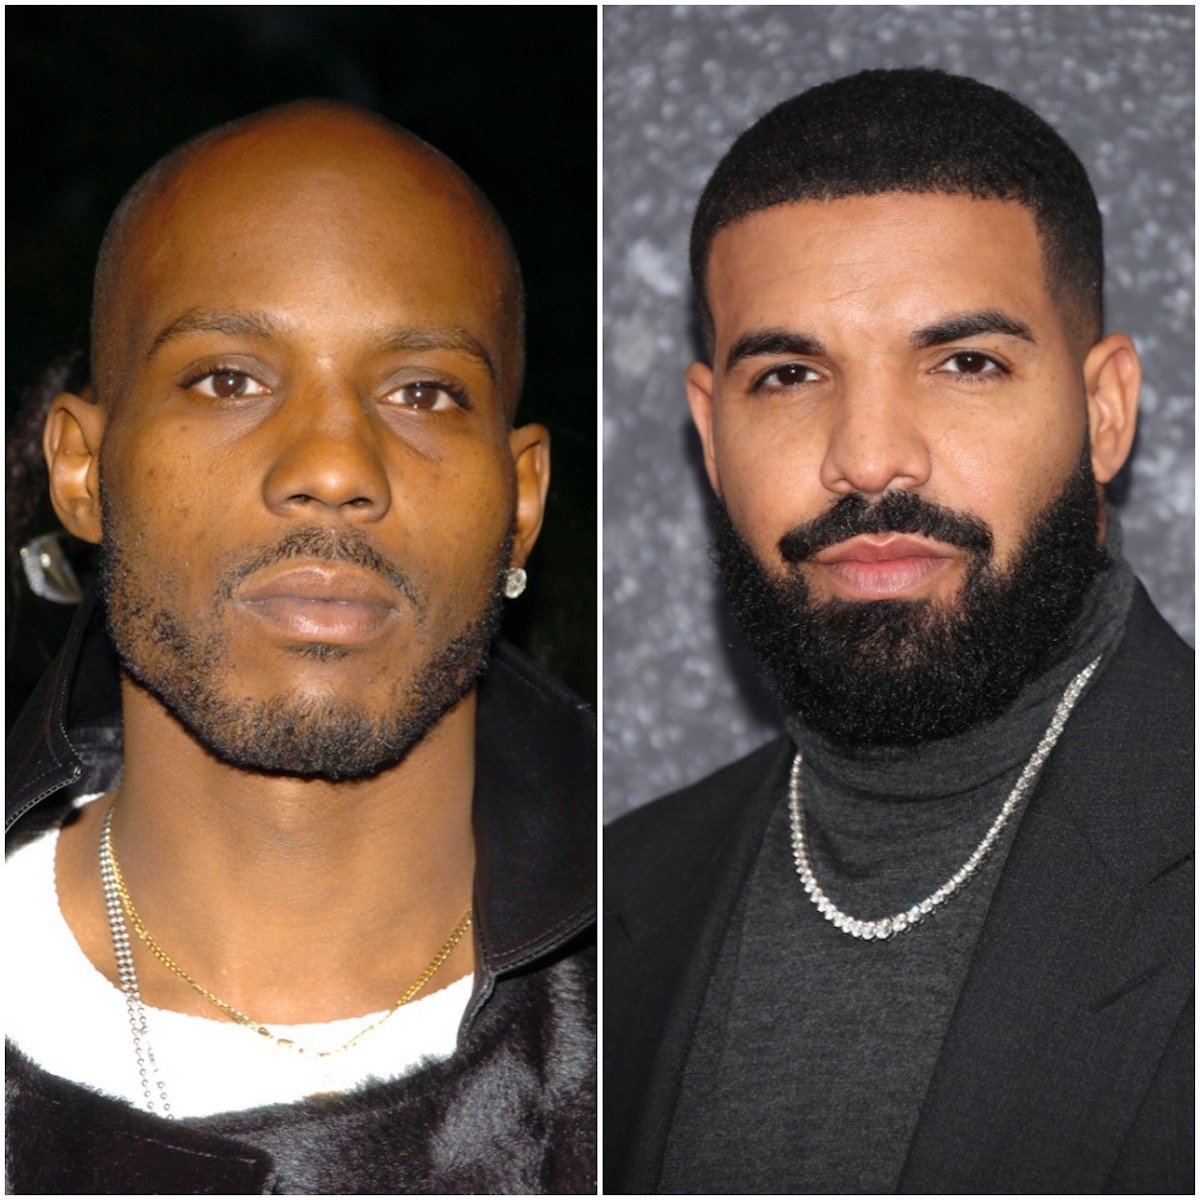 A photo collage featuring DMX and Drake